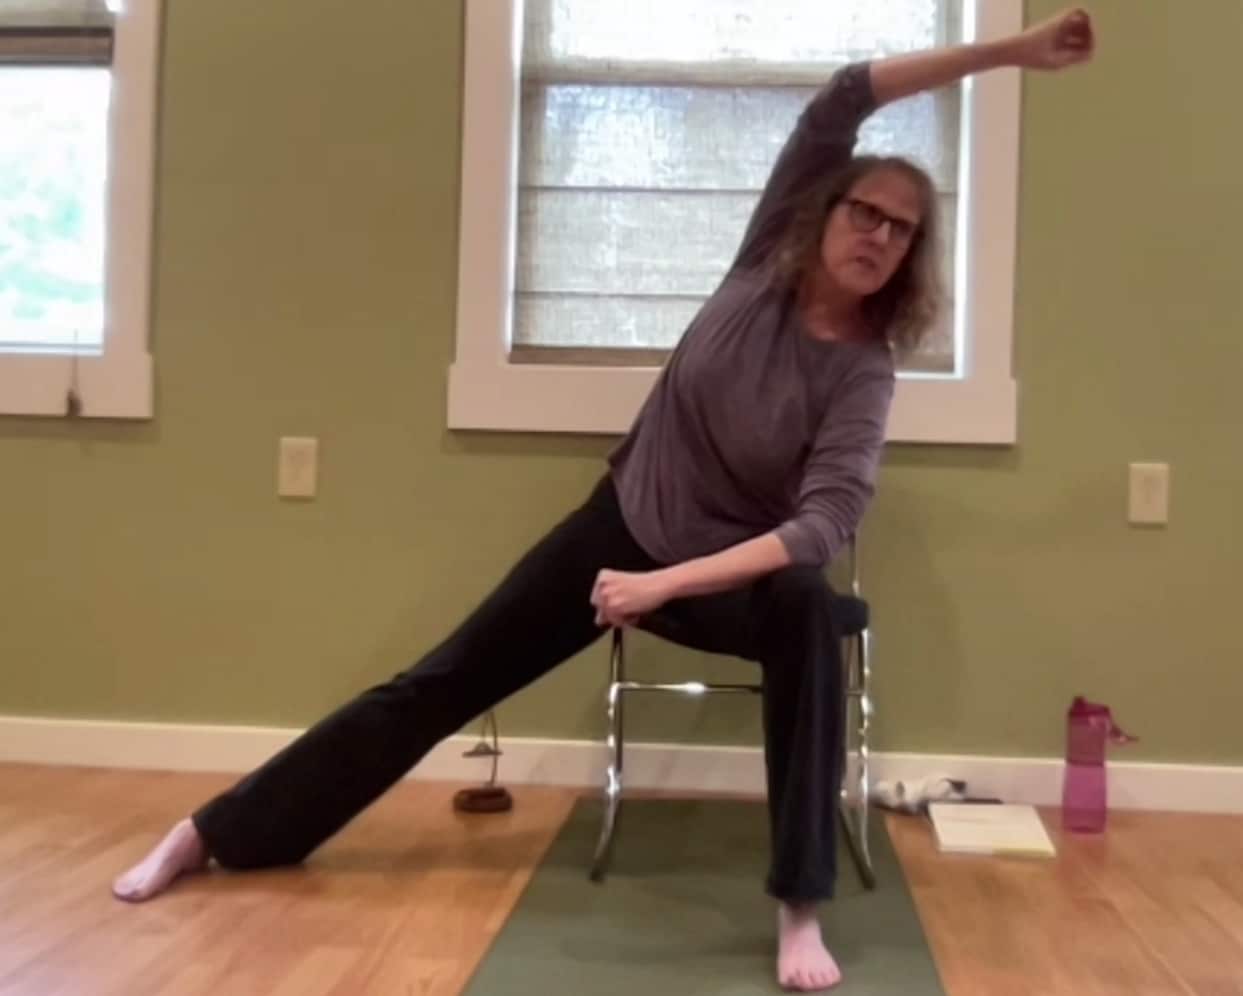 Chair Yoga For Seniors With Limited Mobility—Truly Gentle